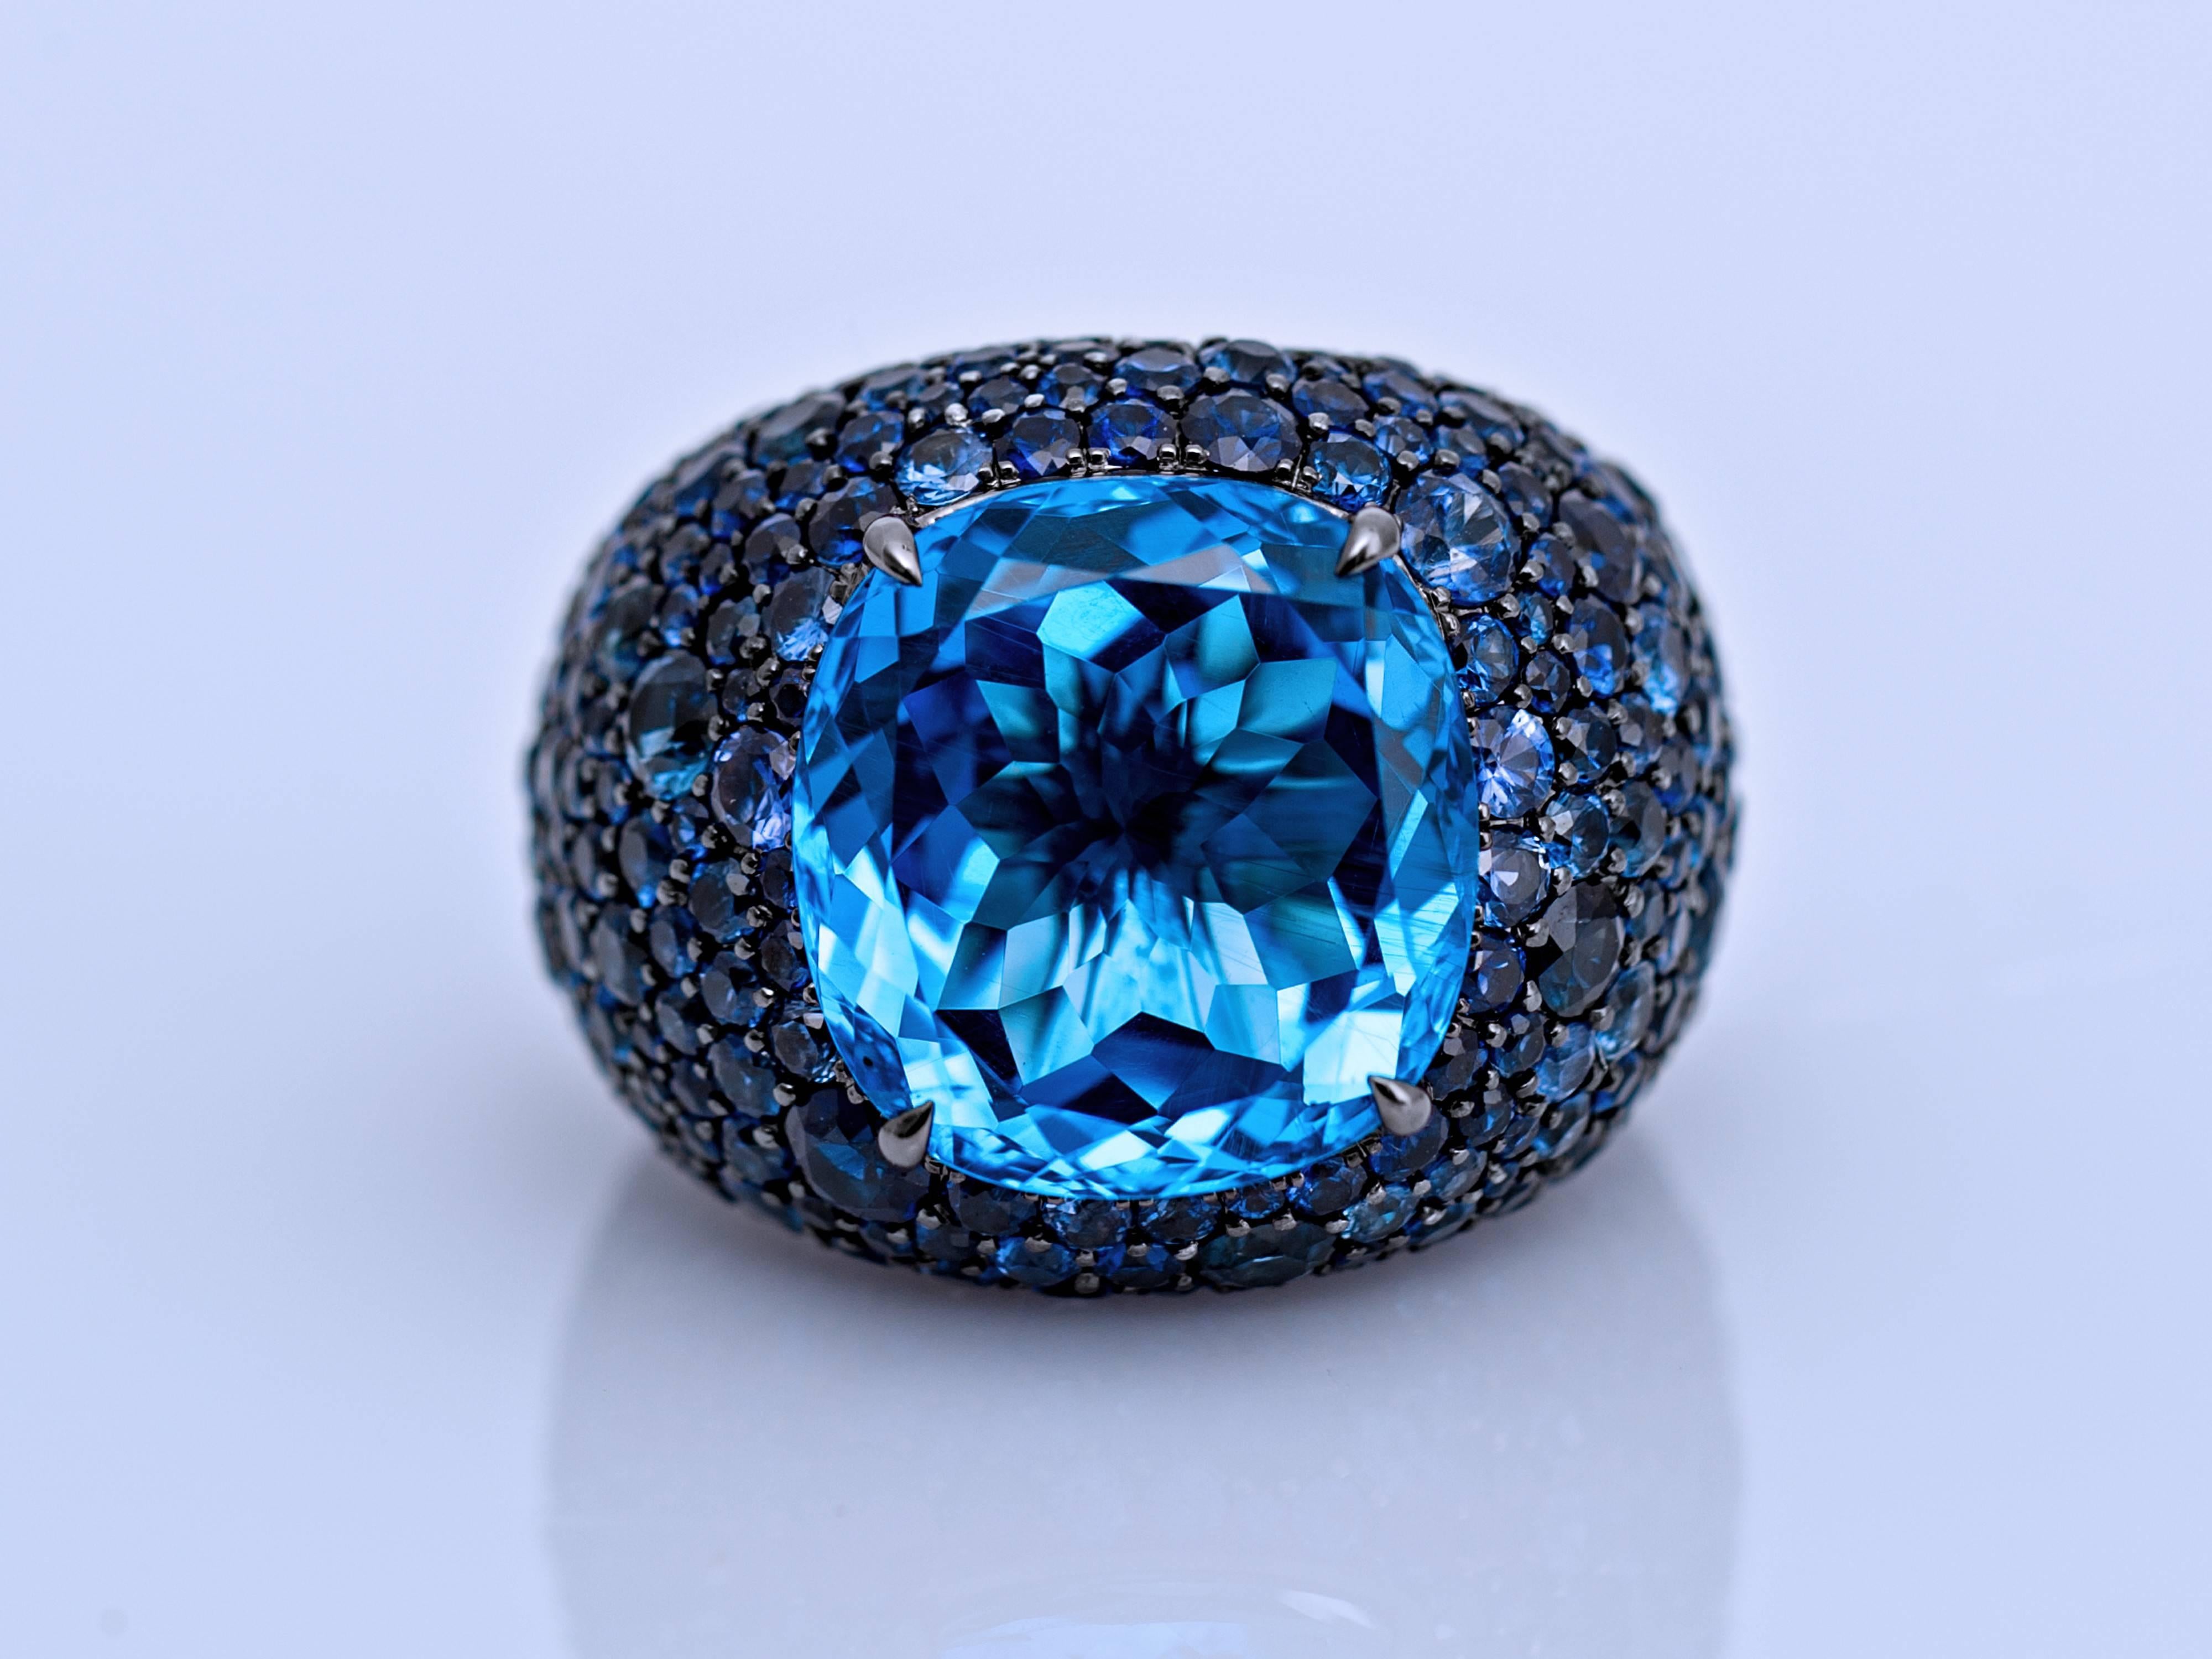 Focusing on the centre of the 18k white gold ring, a cushion shaped 14.24 Carat London Blue Topaz surrounded by 311 round sapphires in different sizes. Capturing its beauty through the mixtures of dark and light blue.